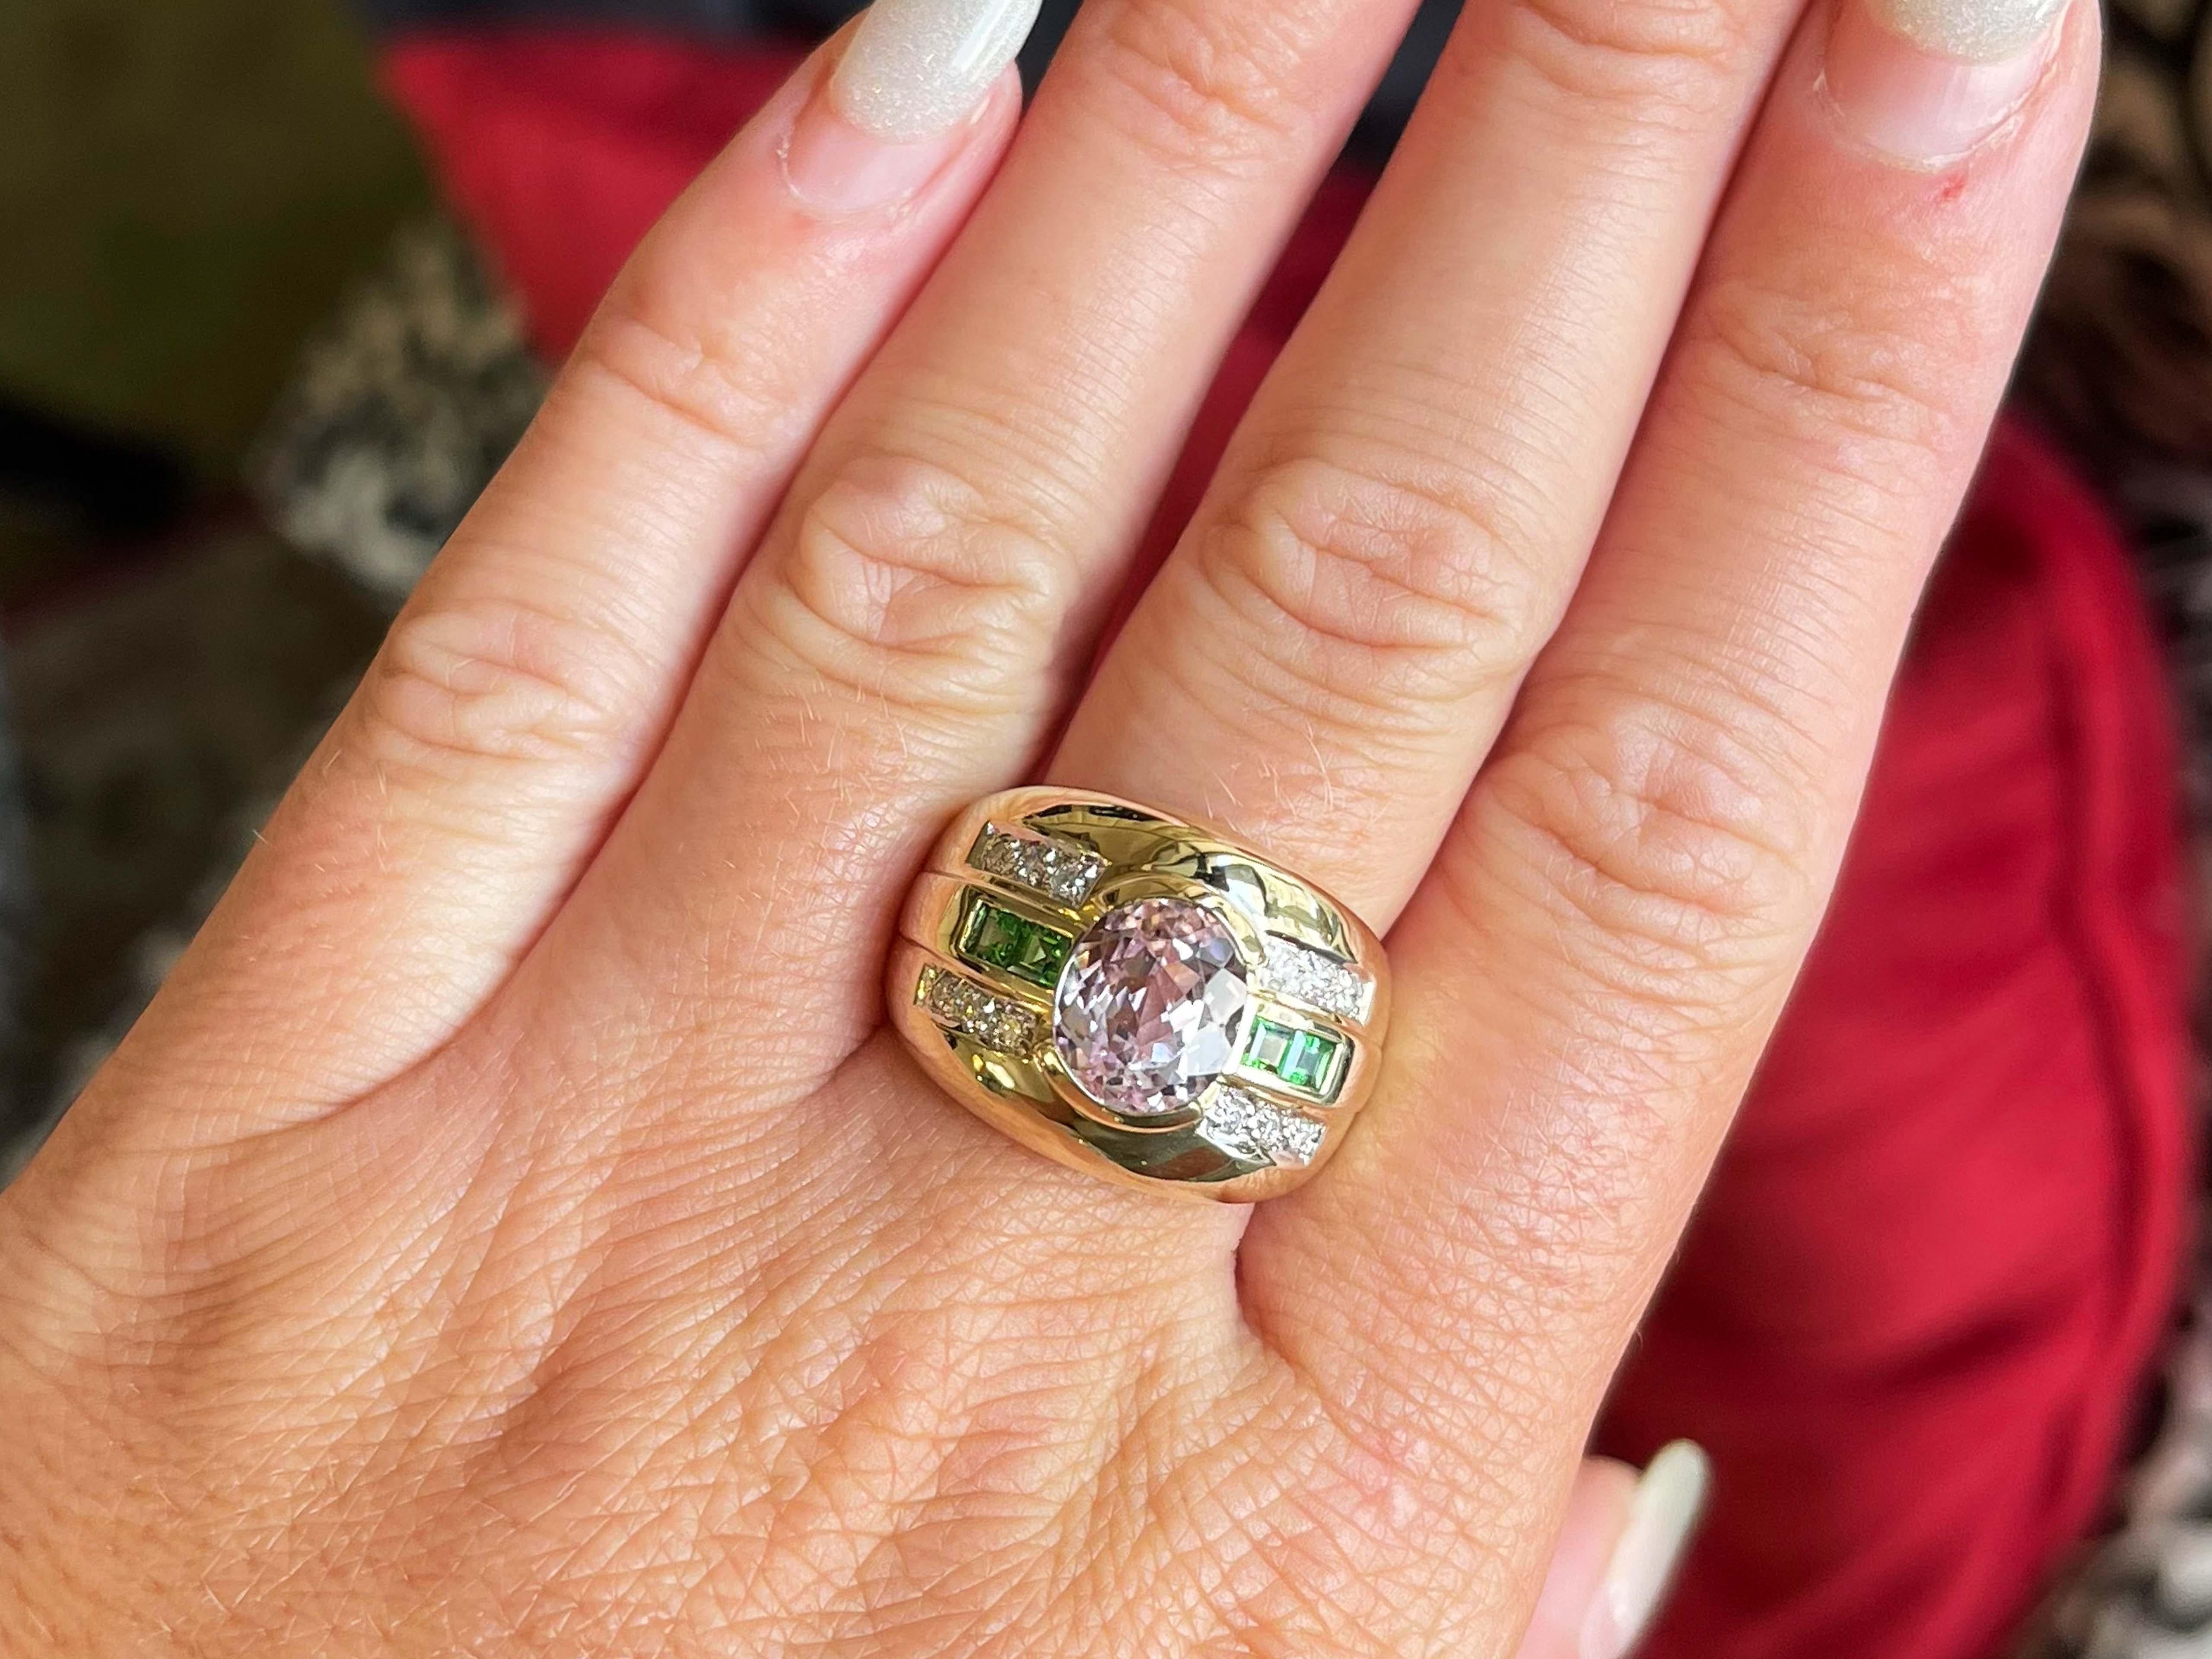 Item Specifications:

Metal: 14K Yellow Gold

Style: Statement Ring

​​Ring Size: 8.75

Total Weight: 14.5 Grams
​
​Diamond Count: 12

Diamond Color: H-I

Diamond Clarity: VS2
​
​​Green Tsavorite Garnet Count: 4

Green Tsavorite Garnet Carat Weight: